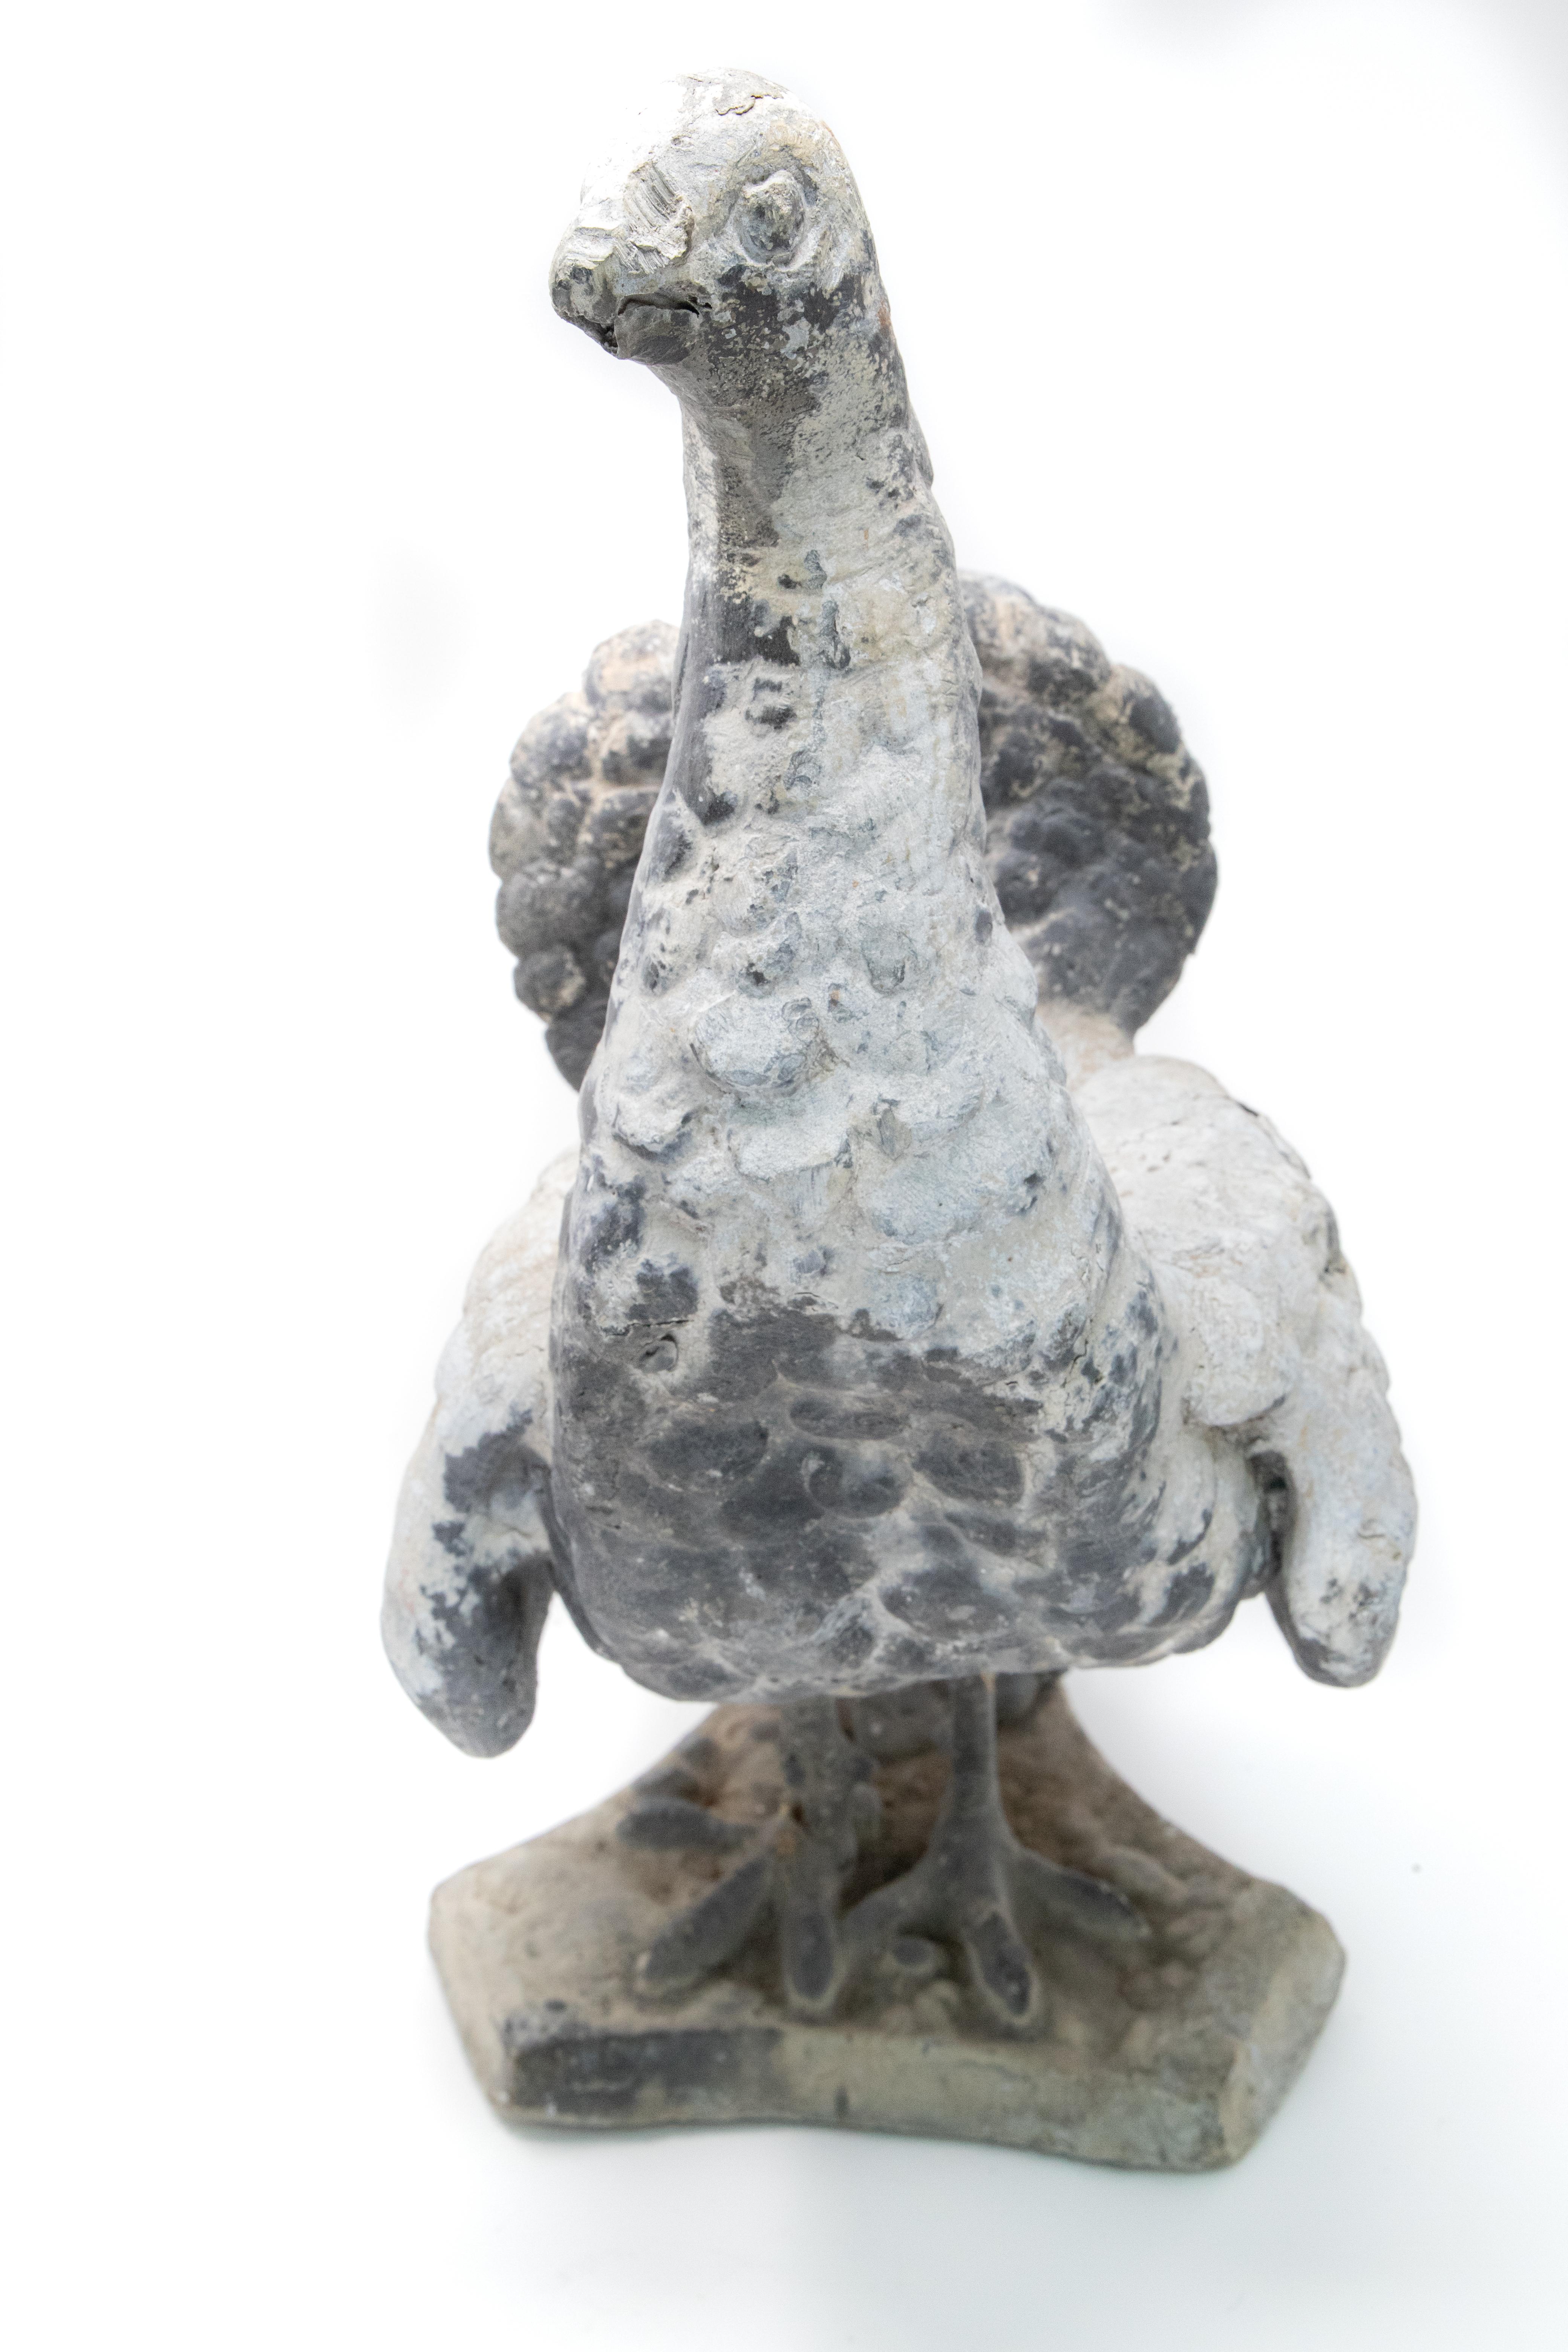 Offering this gorgeous cast Pewter garden statue. Starting on a 3 point base the feet and base of tail start the statue. Rising up to the body of the peacock with the beautiful feathers. The fan is a separate piece that sits in Peacocks tail. Note